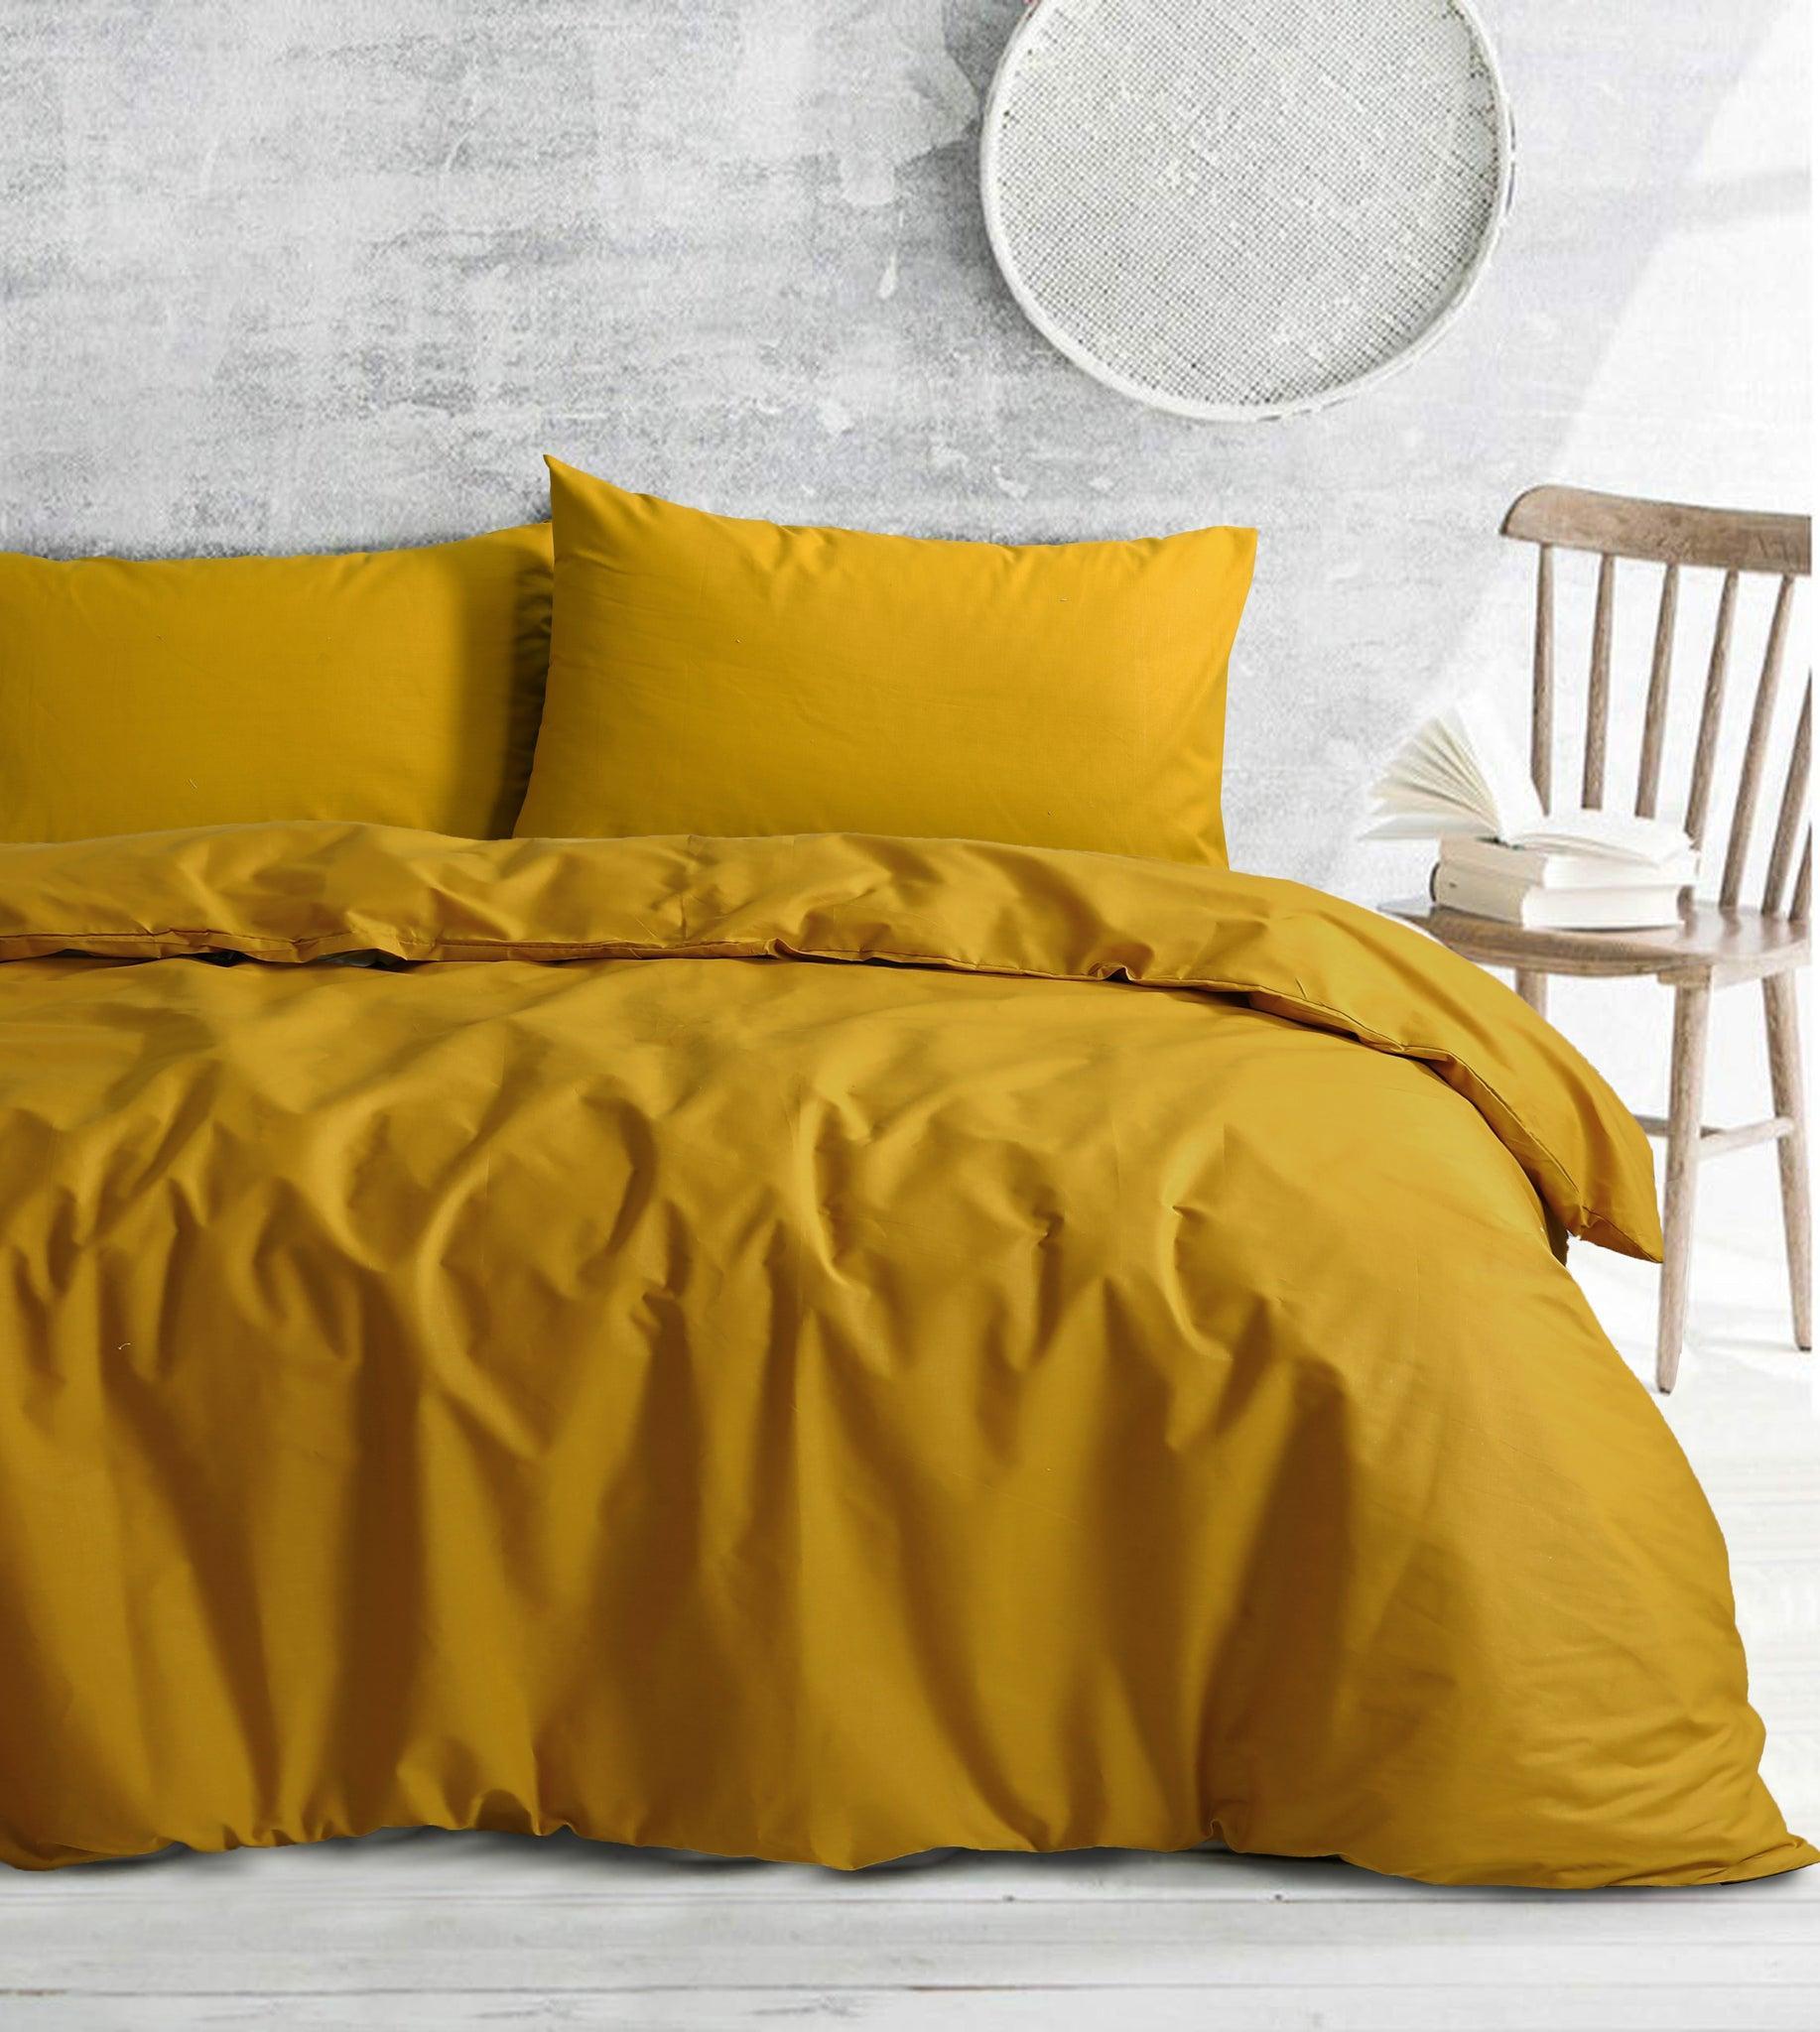 Amsons Royale Cotton King Quilt Duvet Doona Cover Set with Europeon pillowcases - Mustard